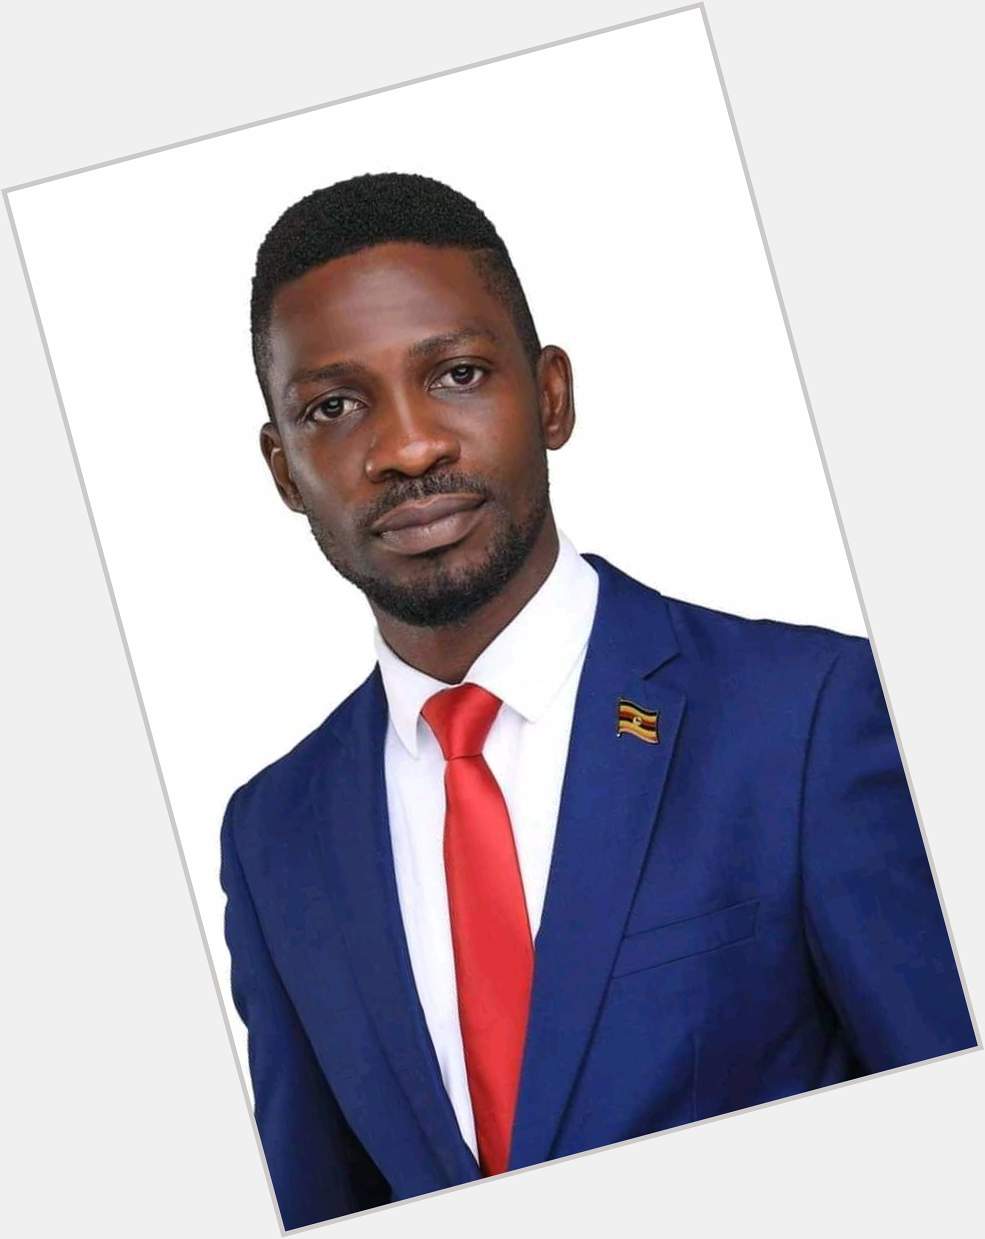 Happy birthday our President Bobi wine may you leave longer 